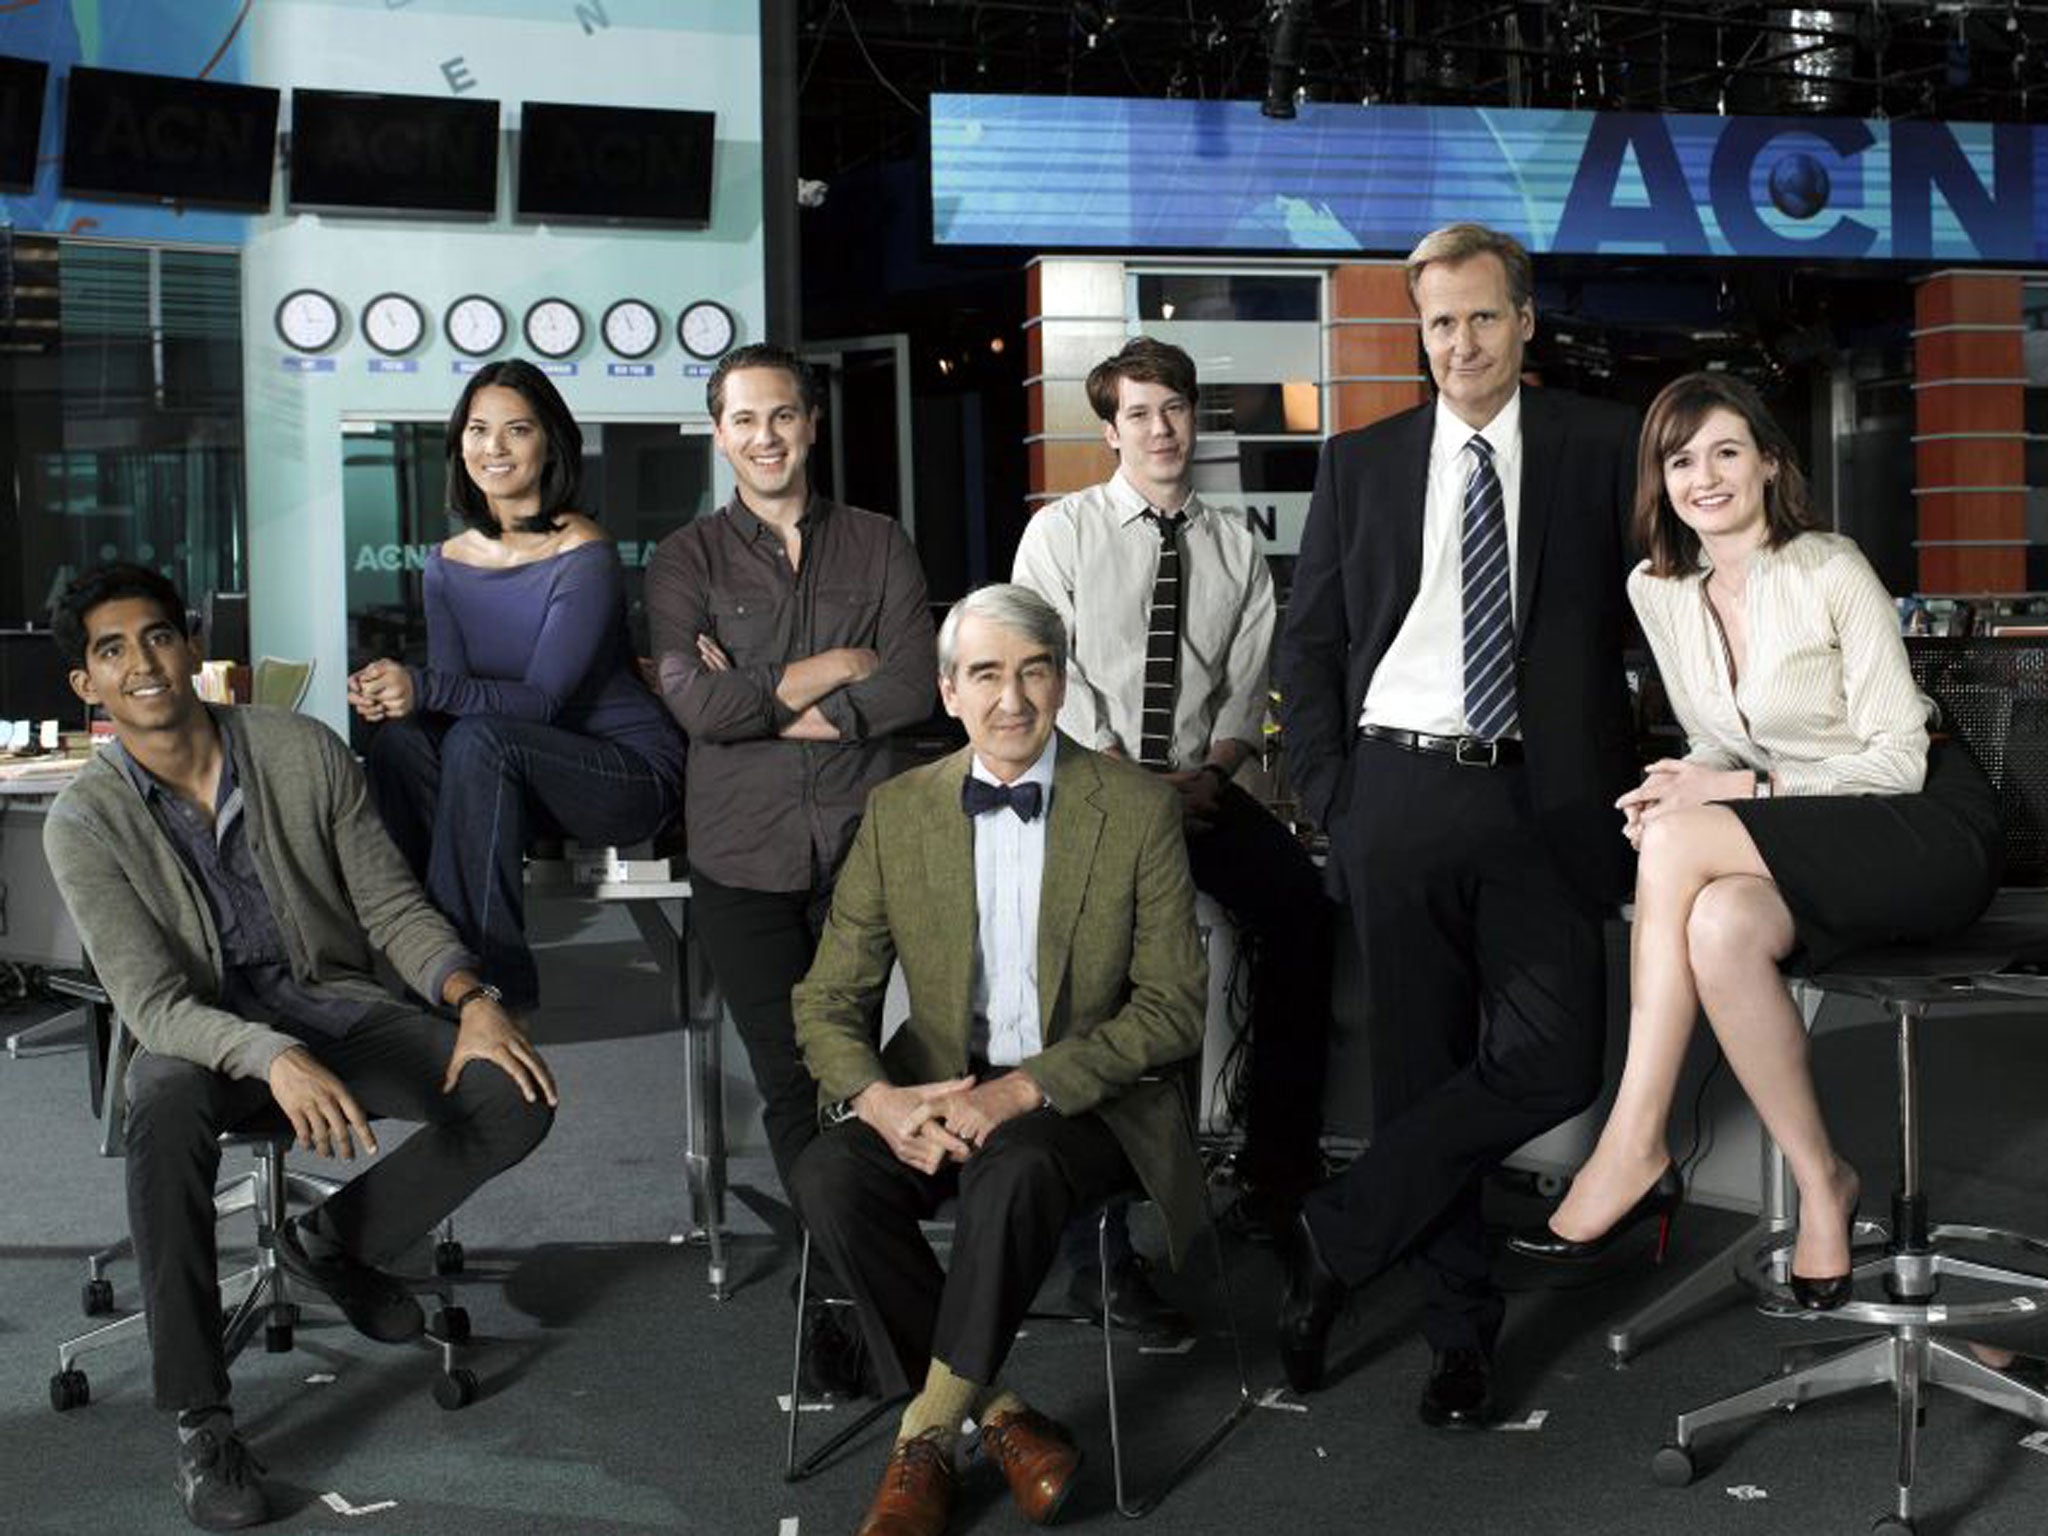 Aaron Sorkin’s Newsroom, about a cable network, that starred Jeff Daniels, Emily Mortimer and Jane Fonda